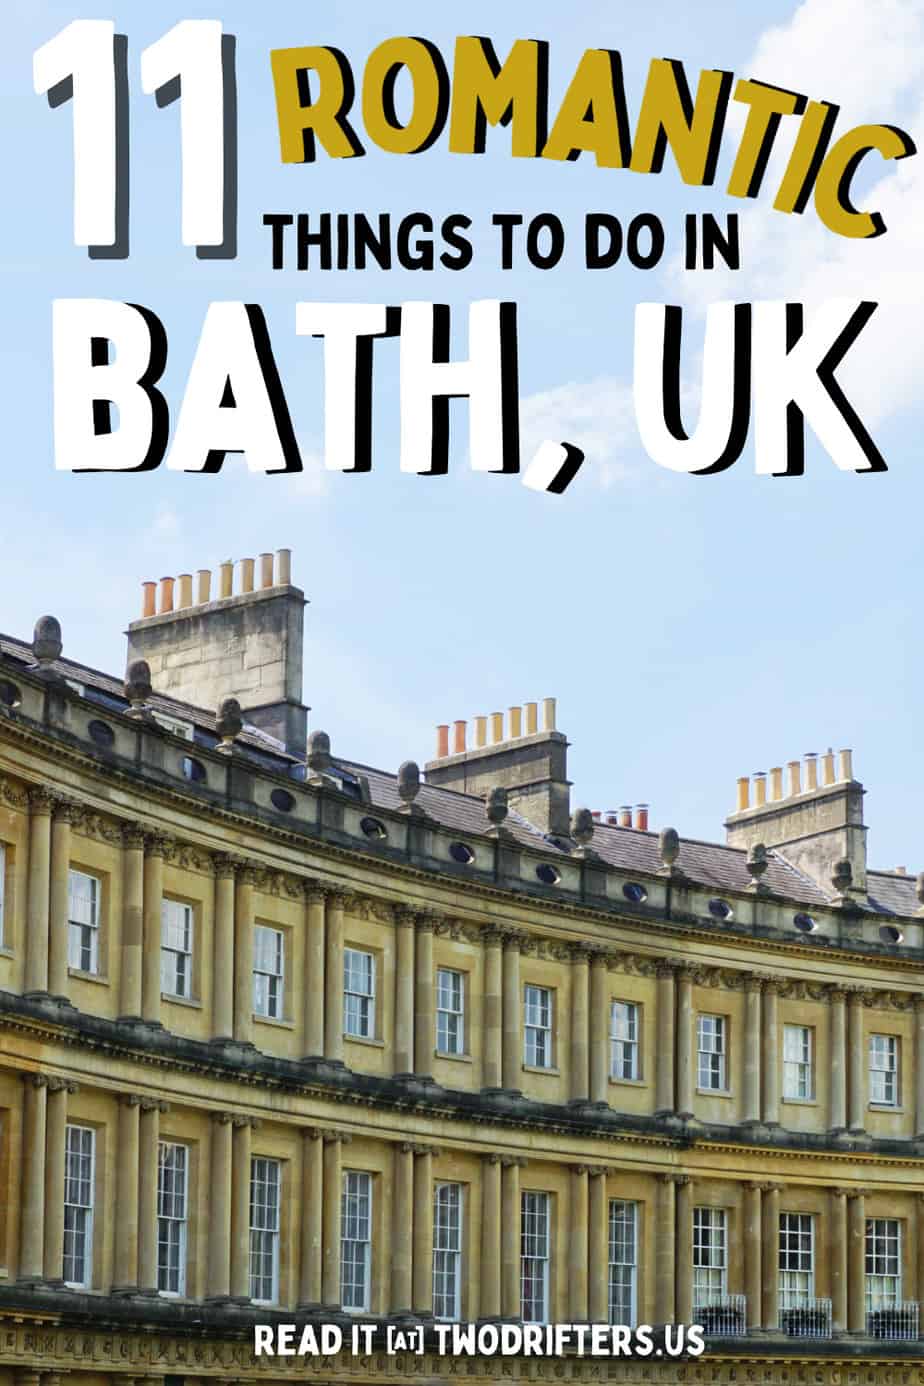 Pinterest social share image that says "10 Romantic Things to do in Bath, UK."